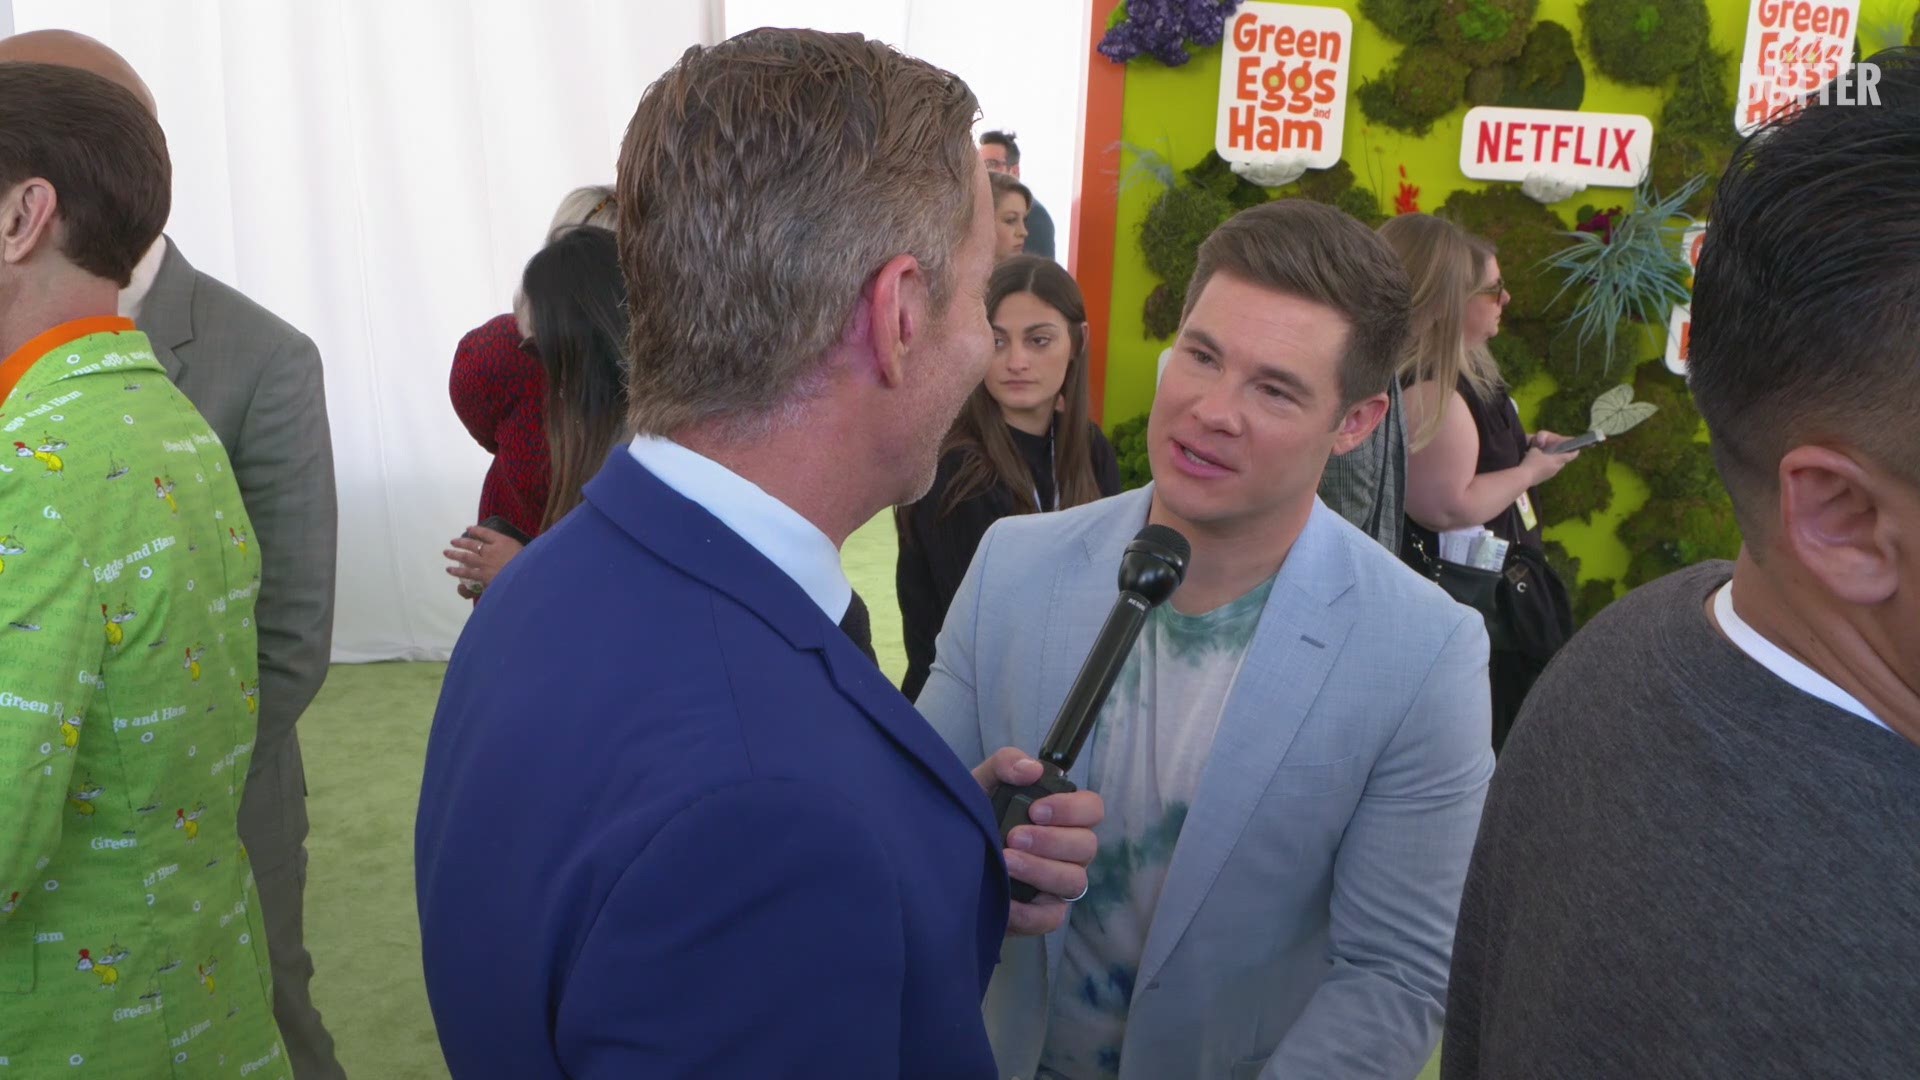 Adam DeVine talks about taking on the iconic role of Sam-I-Am in the new Netflix series 'Green Eggs and Ham.' Adam also talks with Mark S. Allen about his engagement